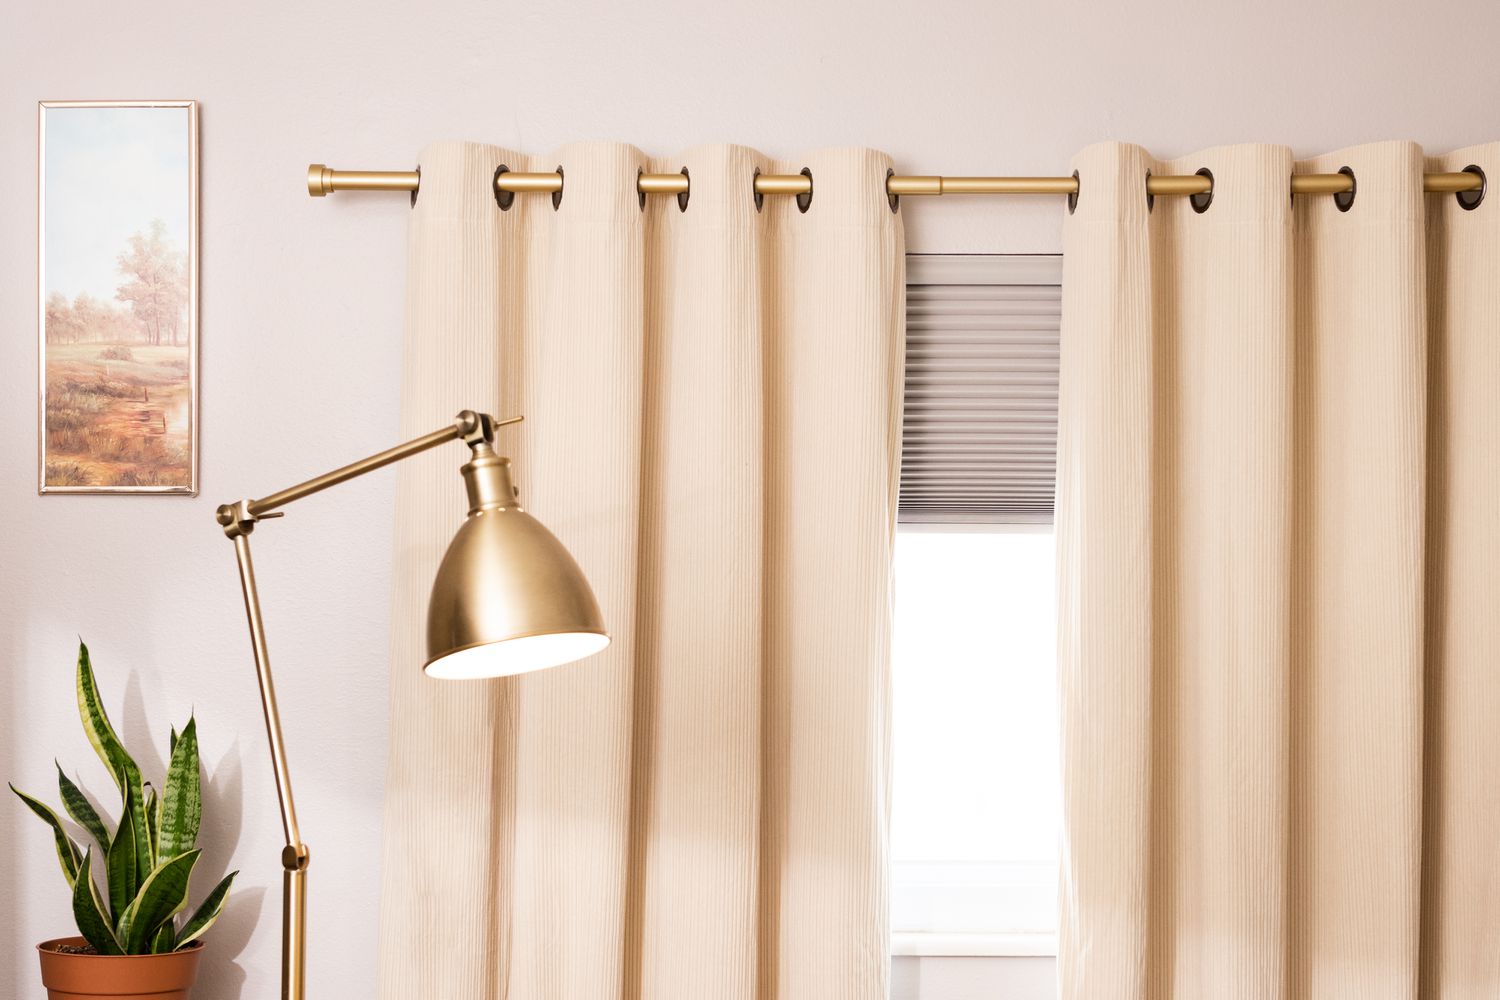 How To Keep Curtains From Sliding On Rod